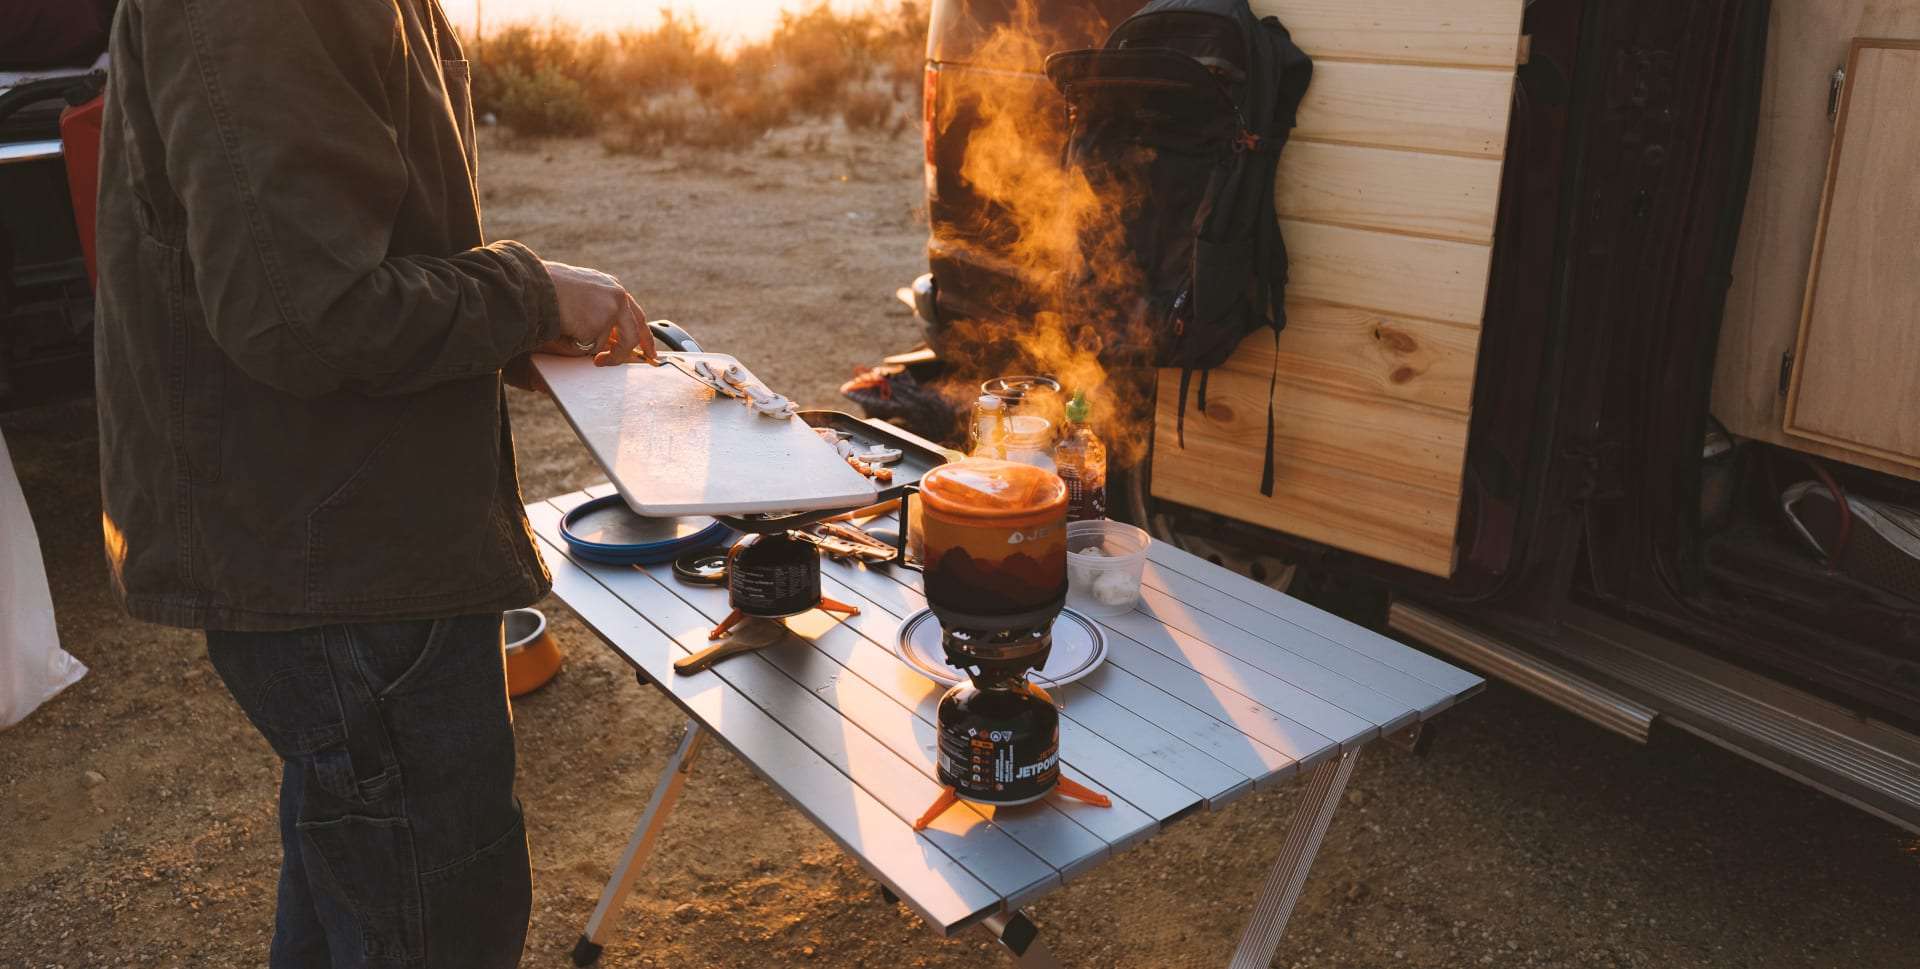 The Jetboil MiniMo camping stove cooking while a man chops vegetables for the meal